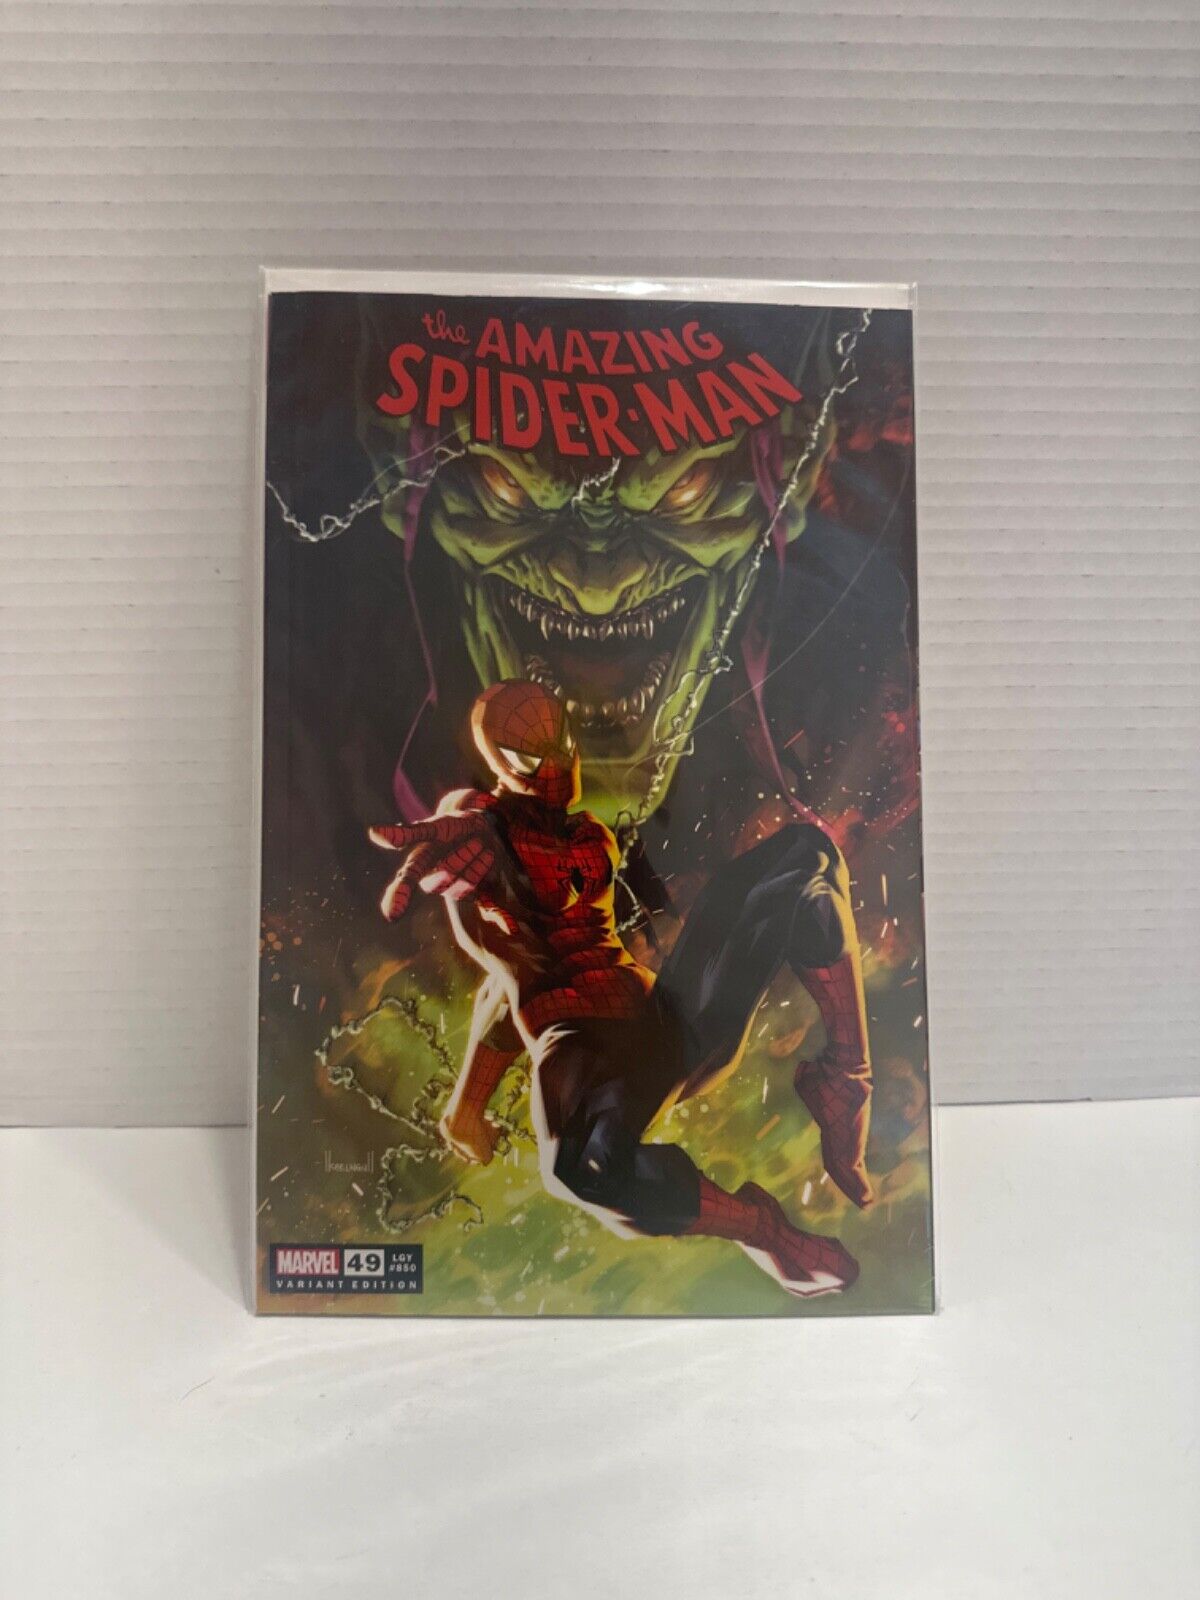 The Amazing Spider-Man #49 Kael Ngu Exclusive Cover Trade Dress